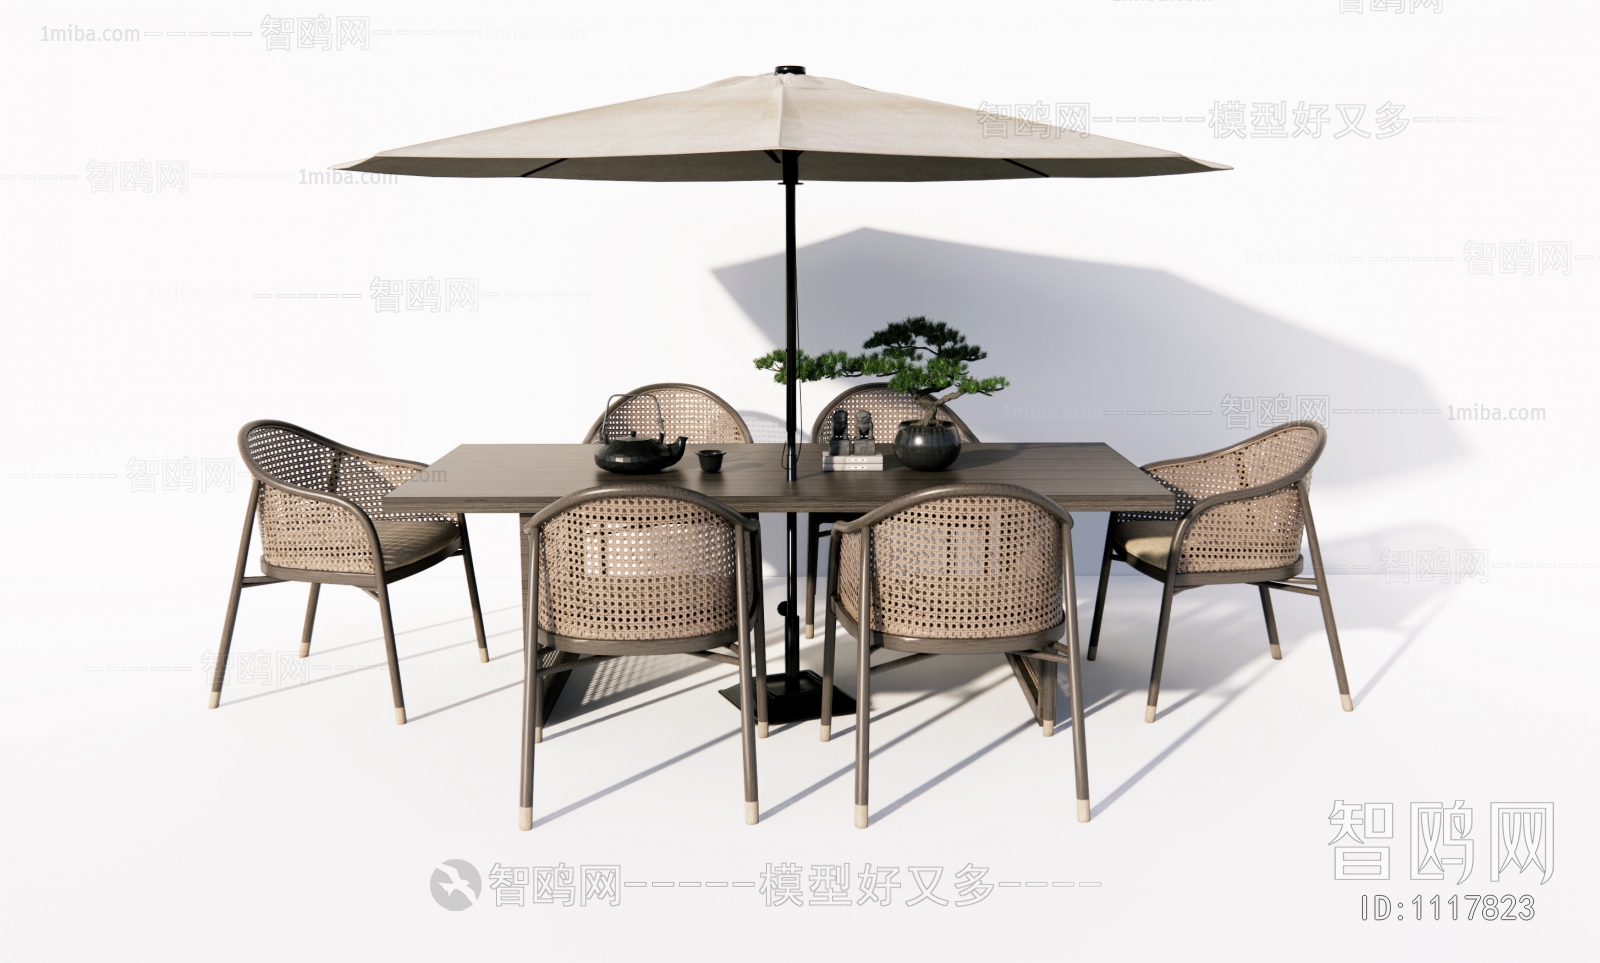 New Chinese Style Outdoor Tables And Chairs